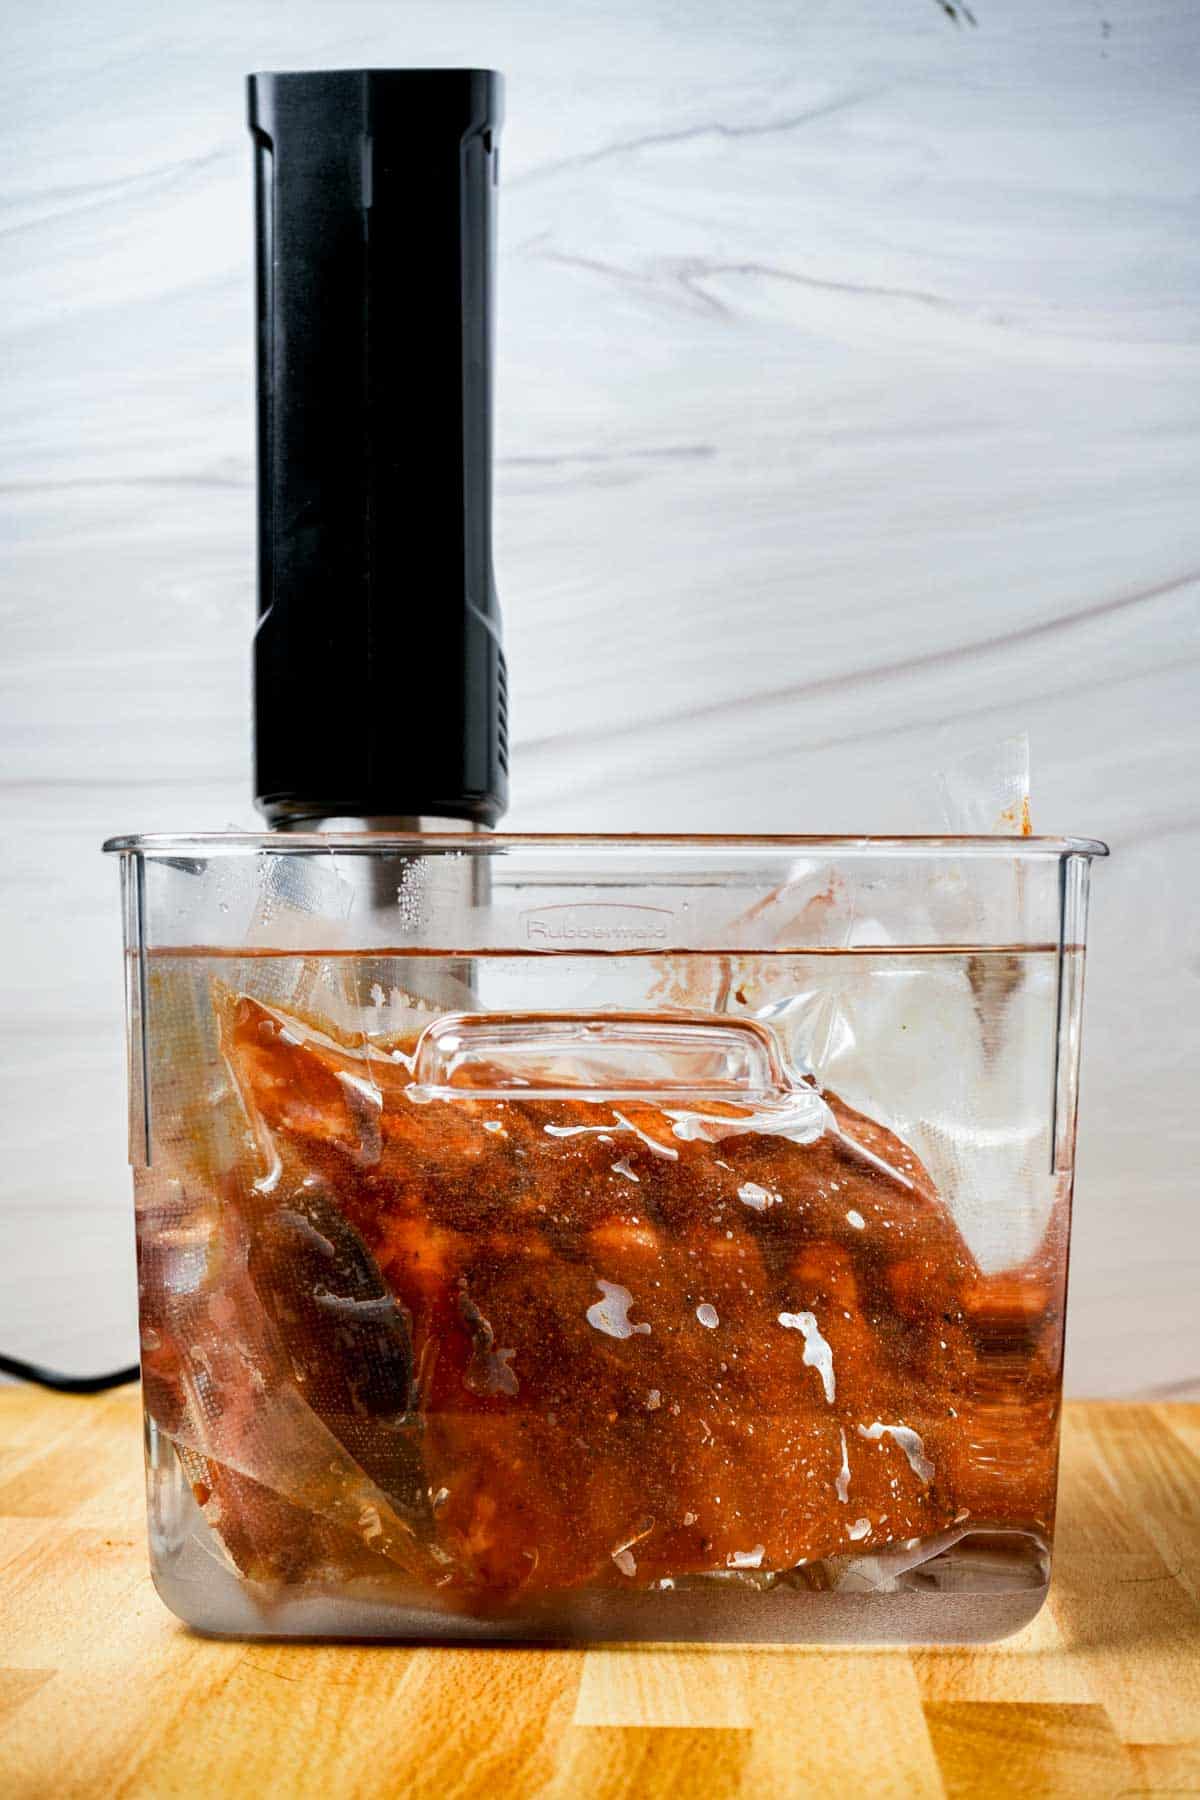 a bag of ribs being cooked in a sous vide water bath